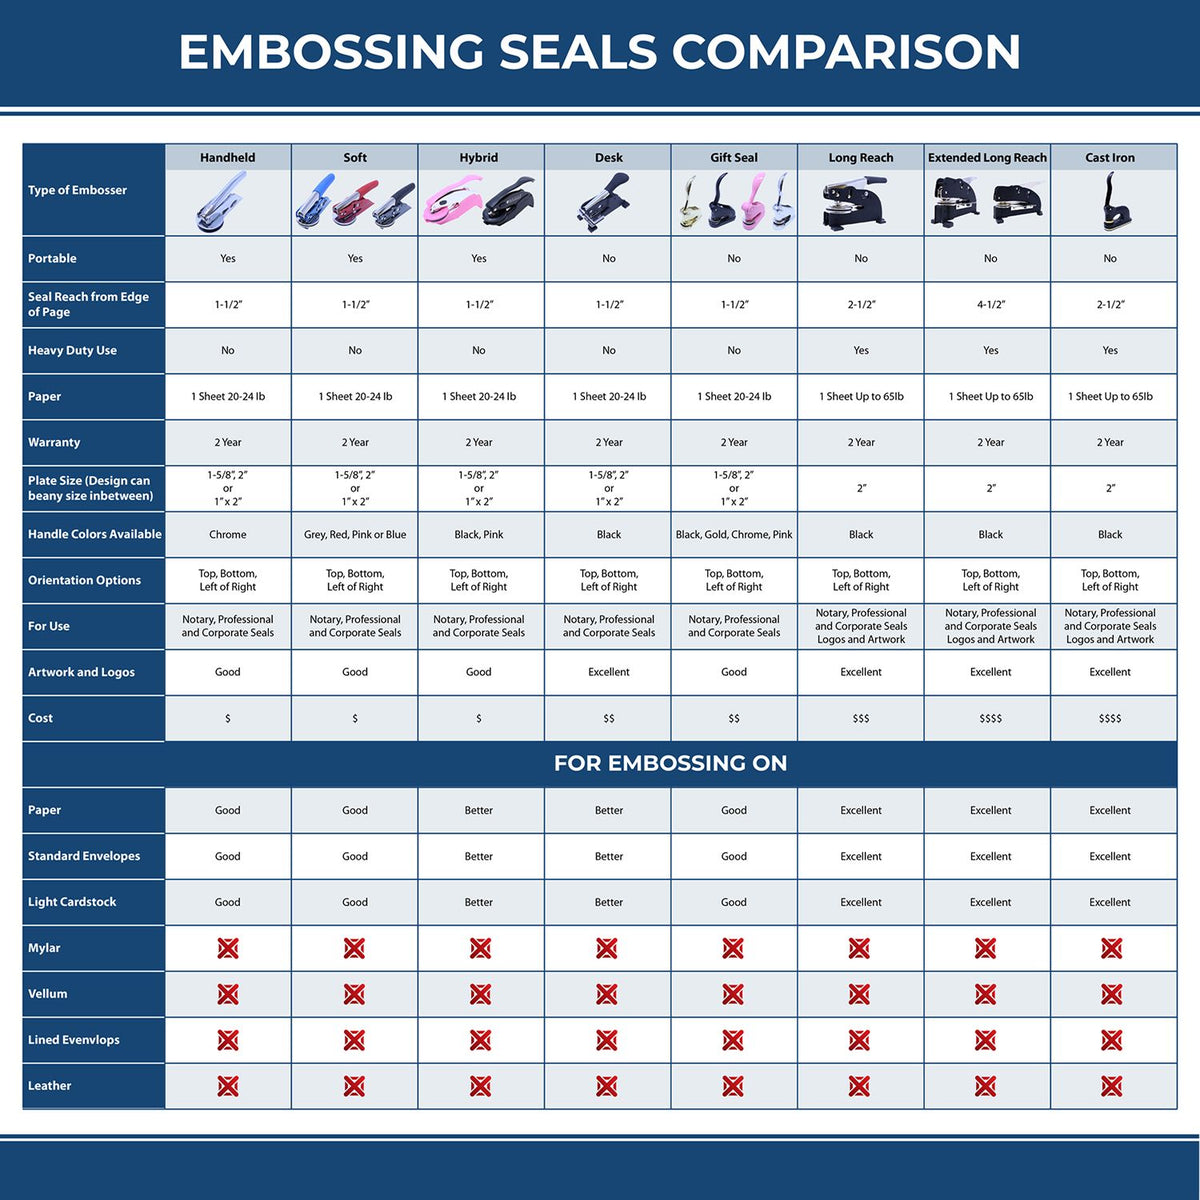 A comparison chart for the different types of mount models available for the Hybrid Delaware Geologist Seal